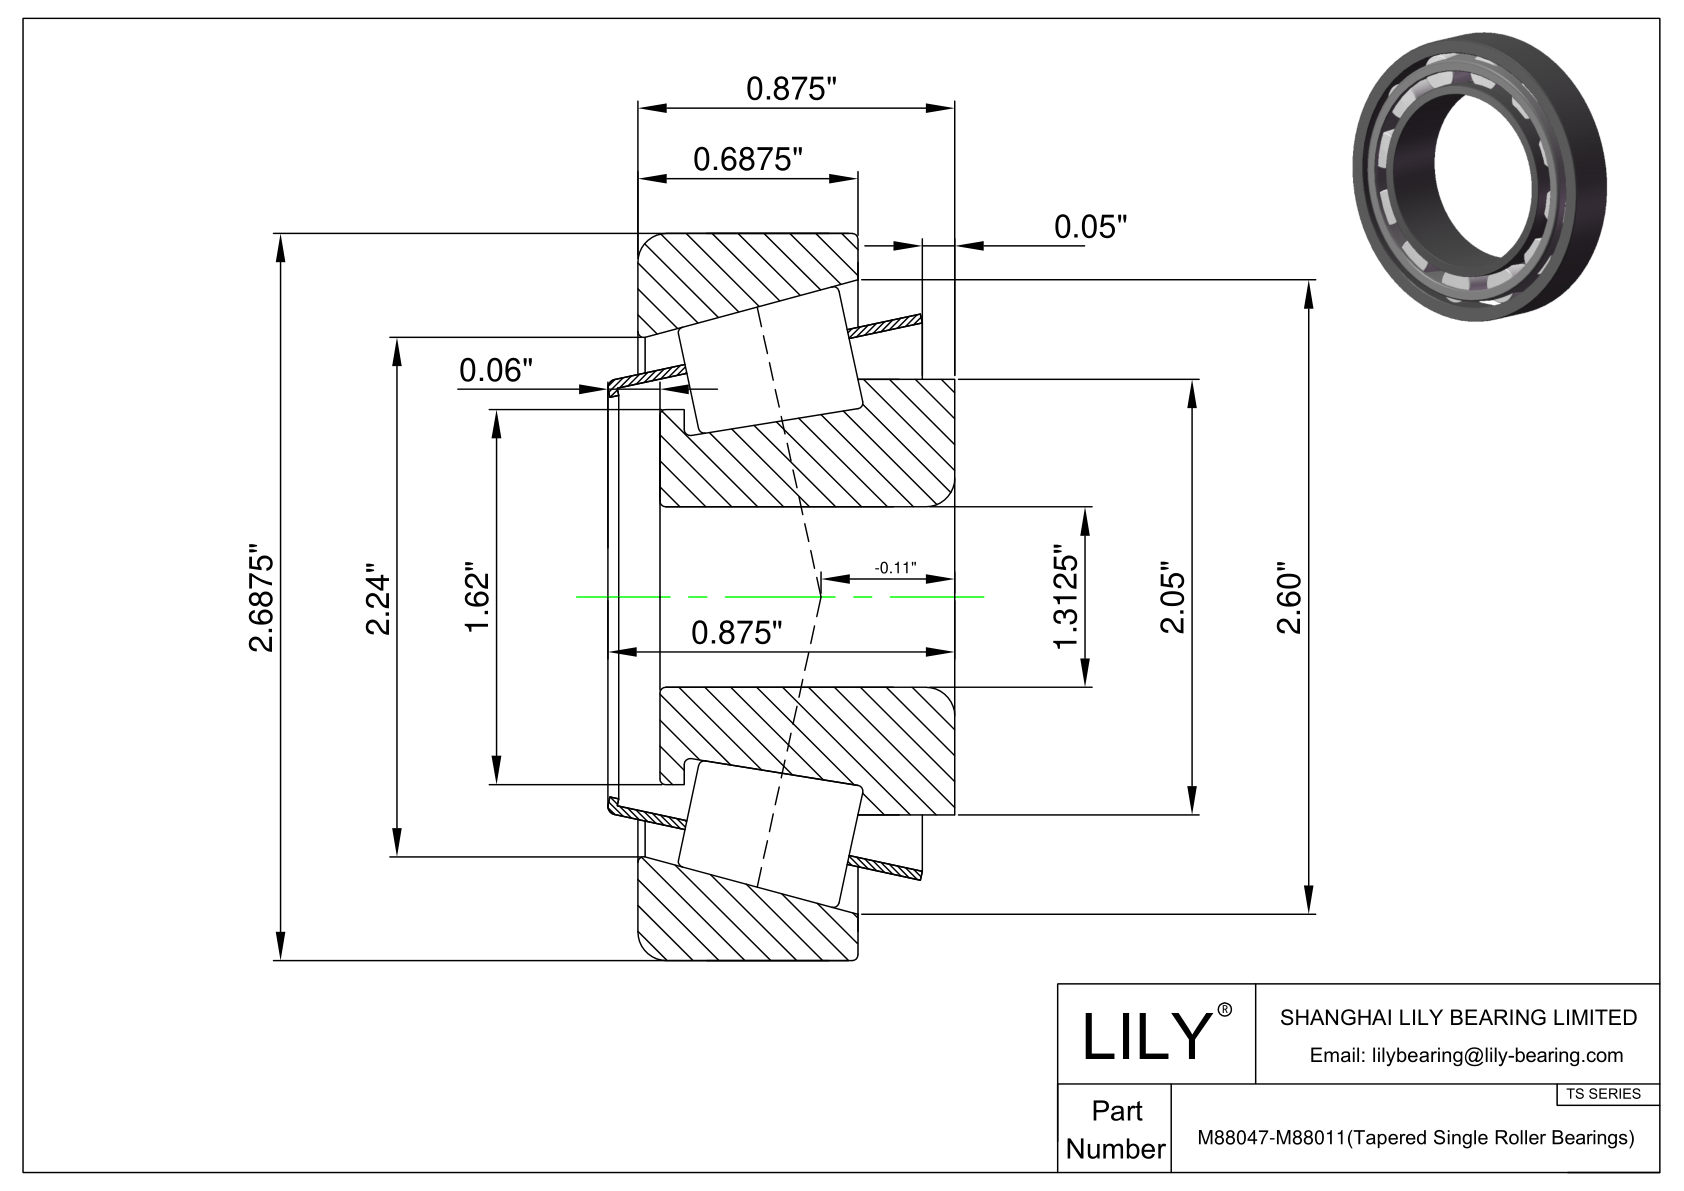 M88047-M88011 TS (Tapered Single Roller Bearings) (Imperial) cad drawing